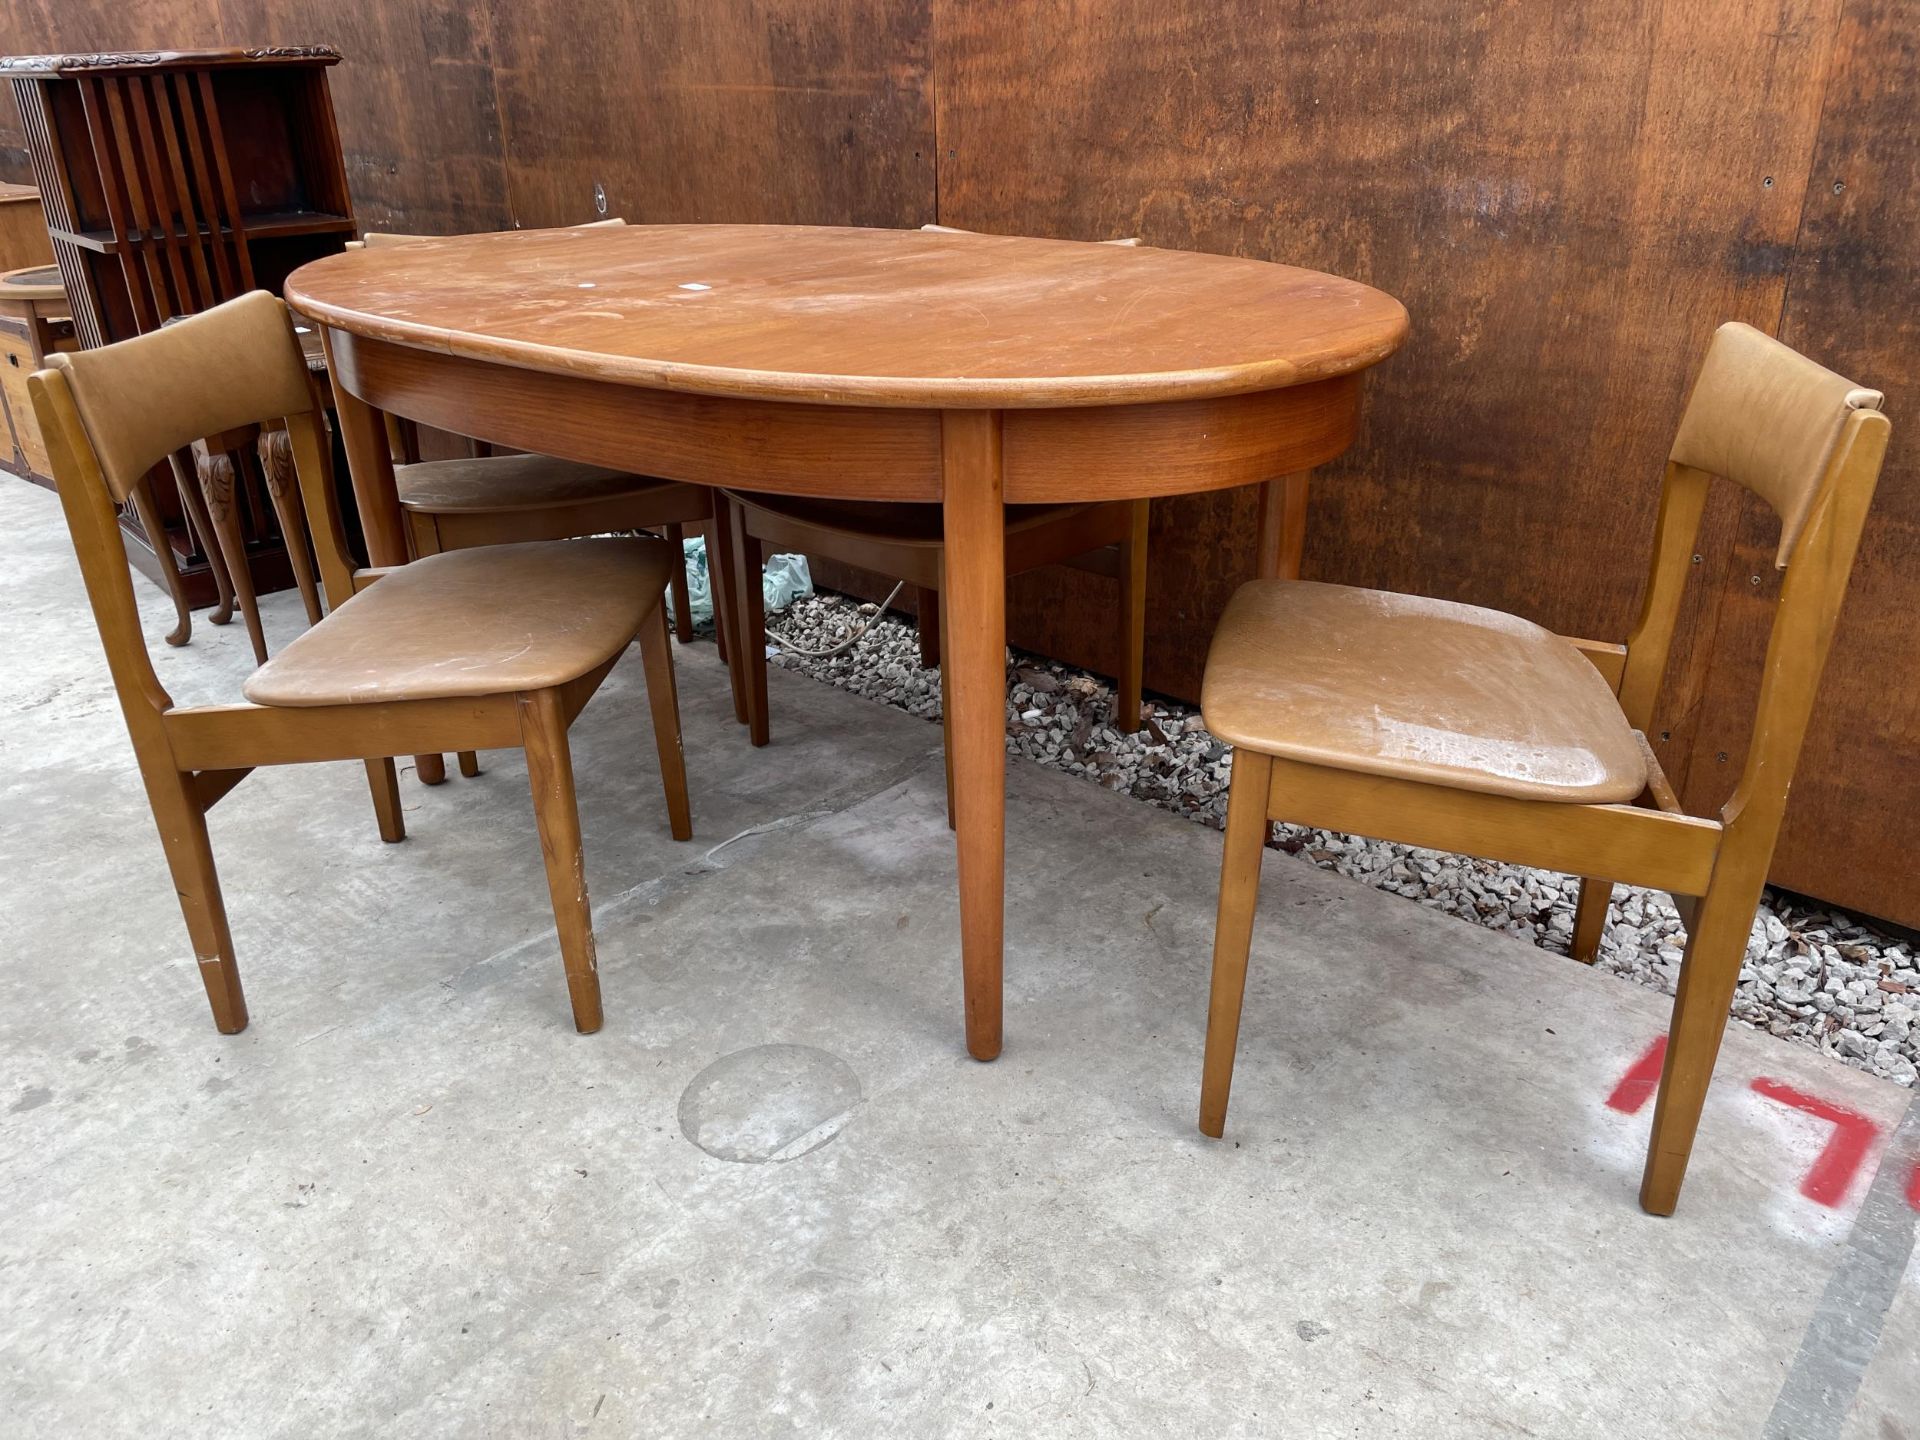 AN OVAL RETRO TEAK EXTENDING DINING TABLE, 60 X 36" (LEAF 18") AND FOUR CHAIRS - Image 5 of 6